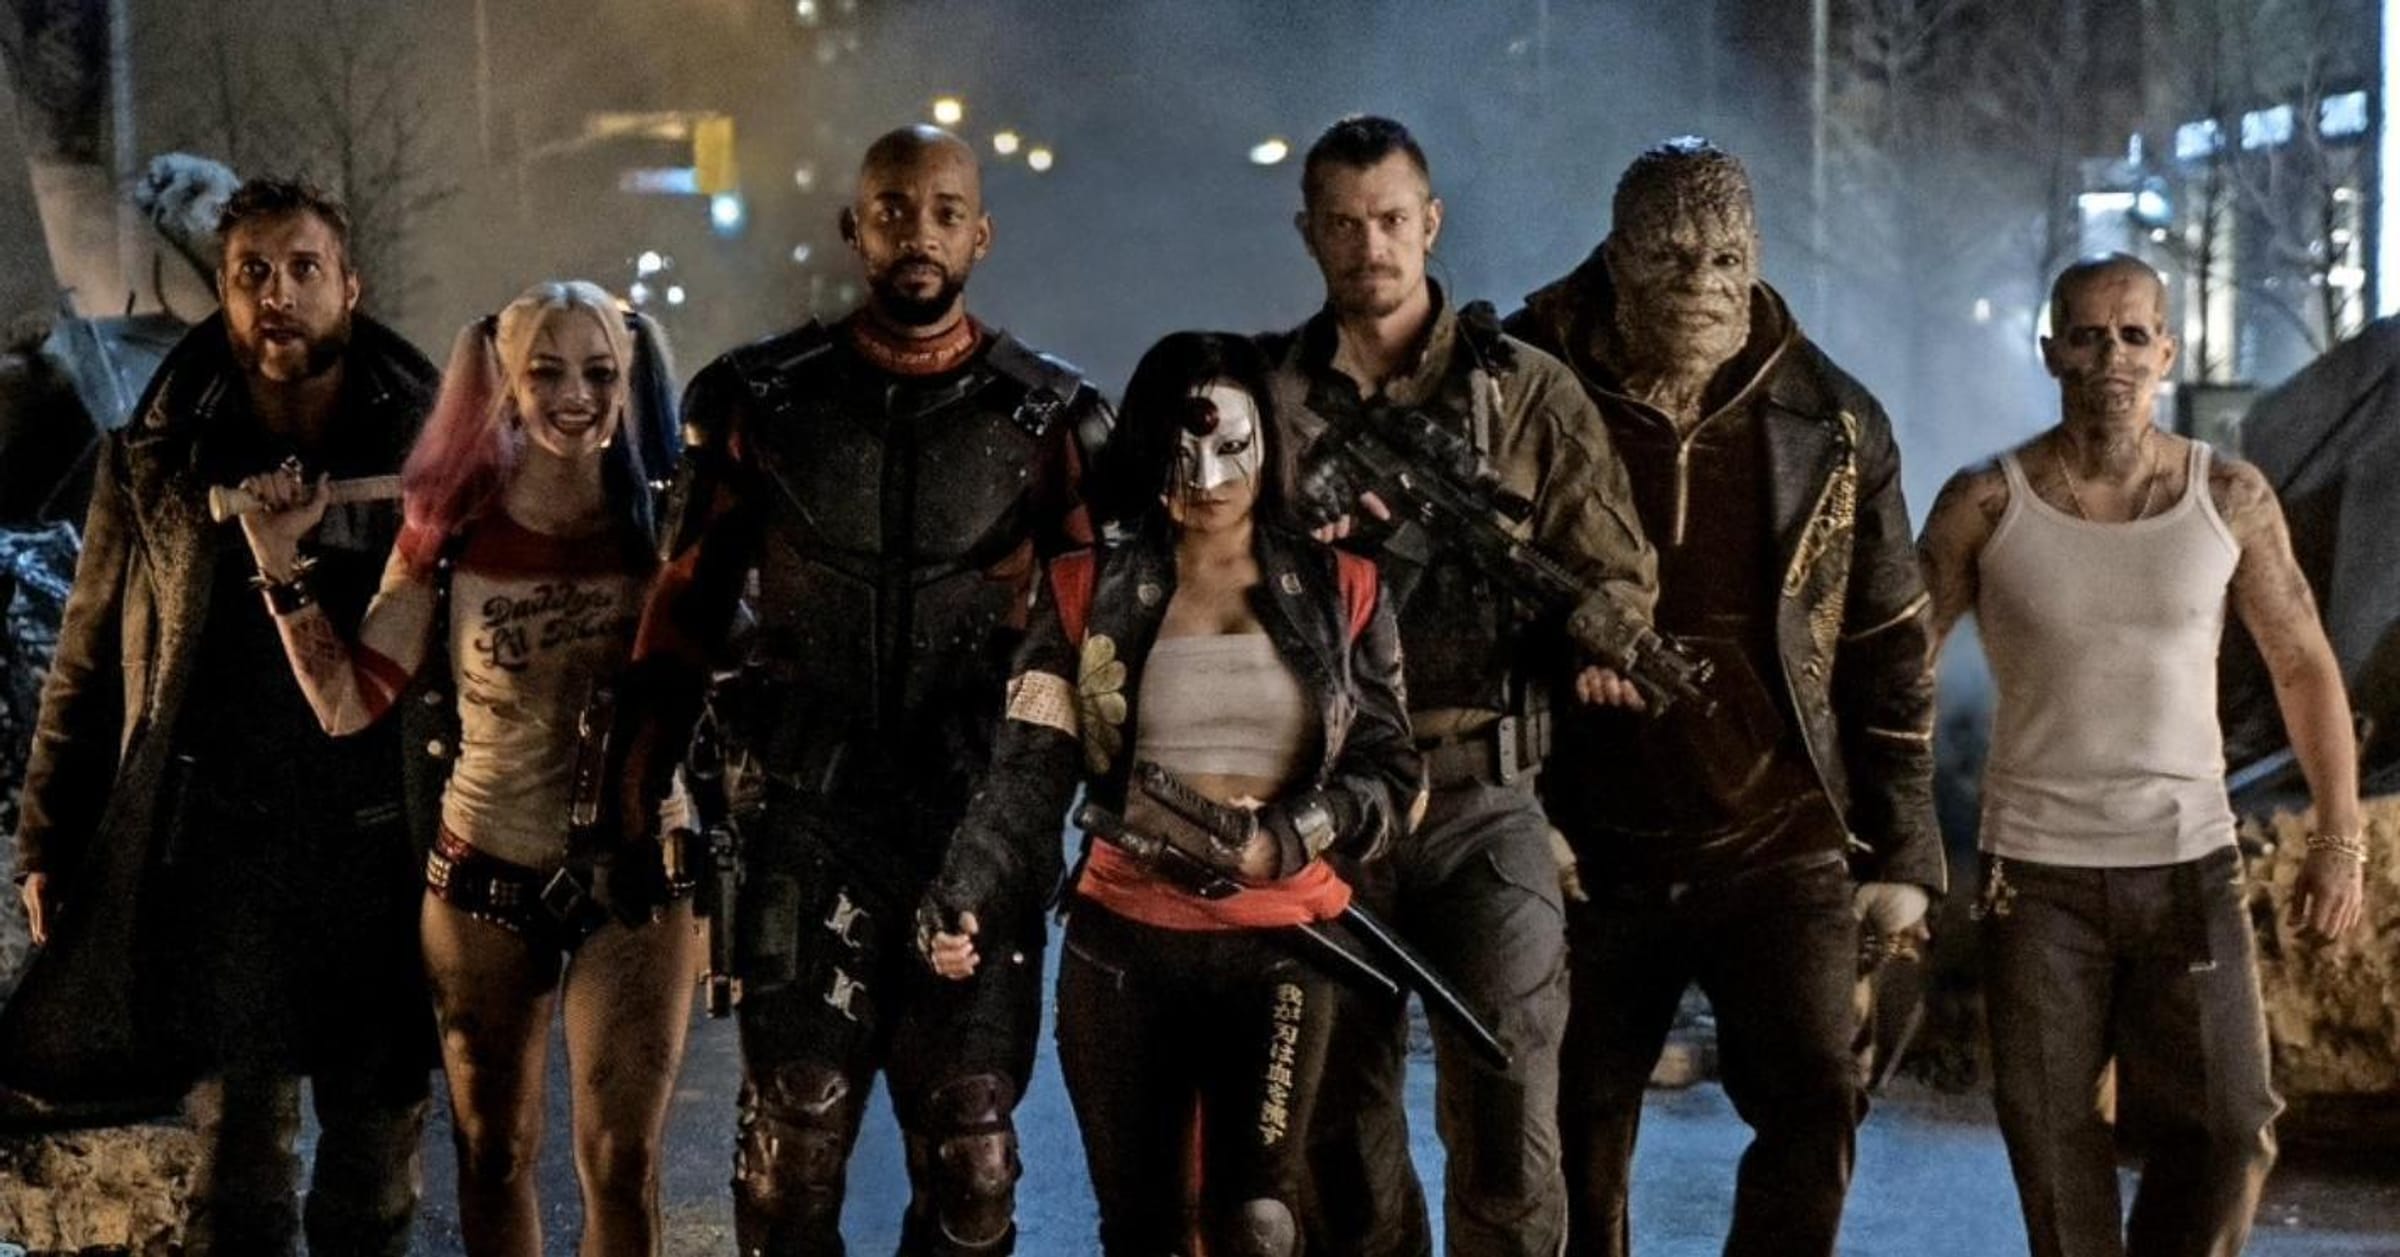 Poll: Who Are Your Favorite Suicide Squad Characters?